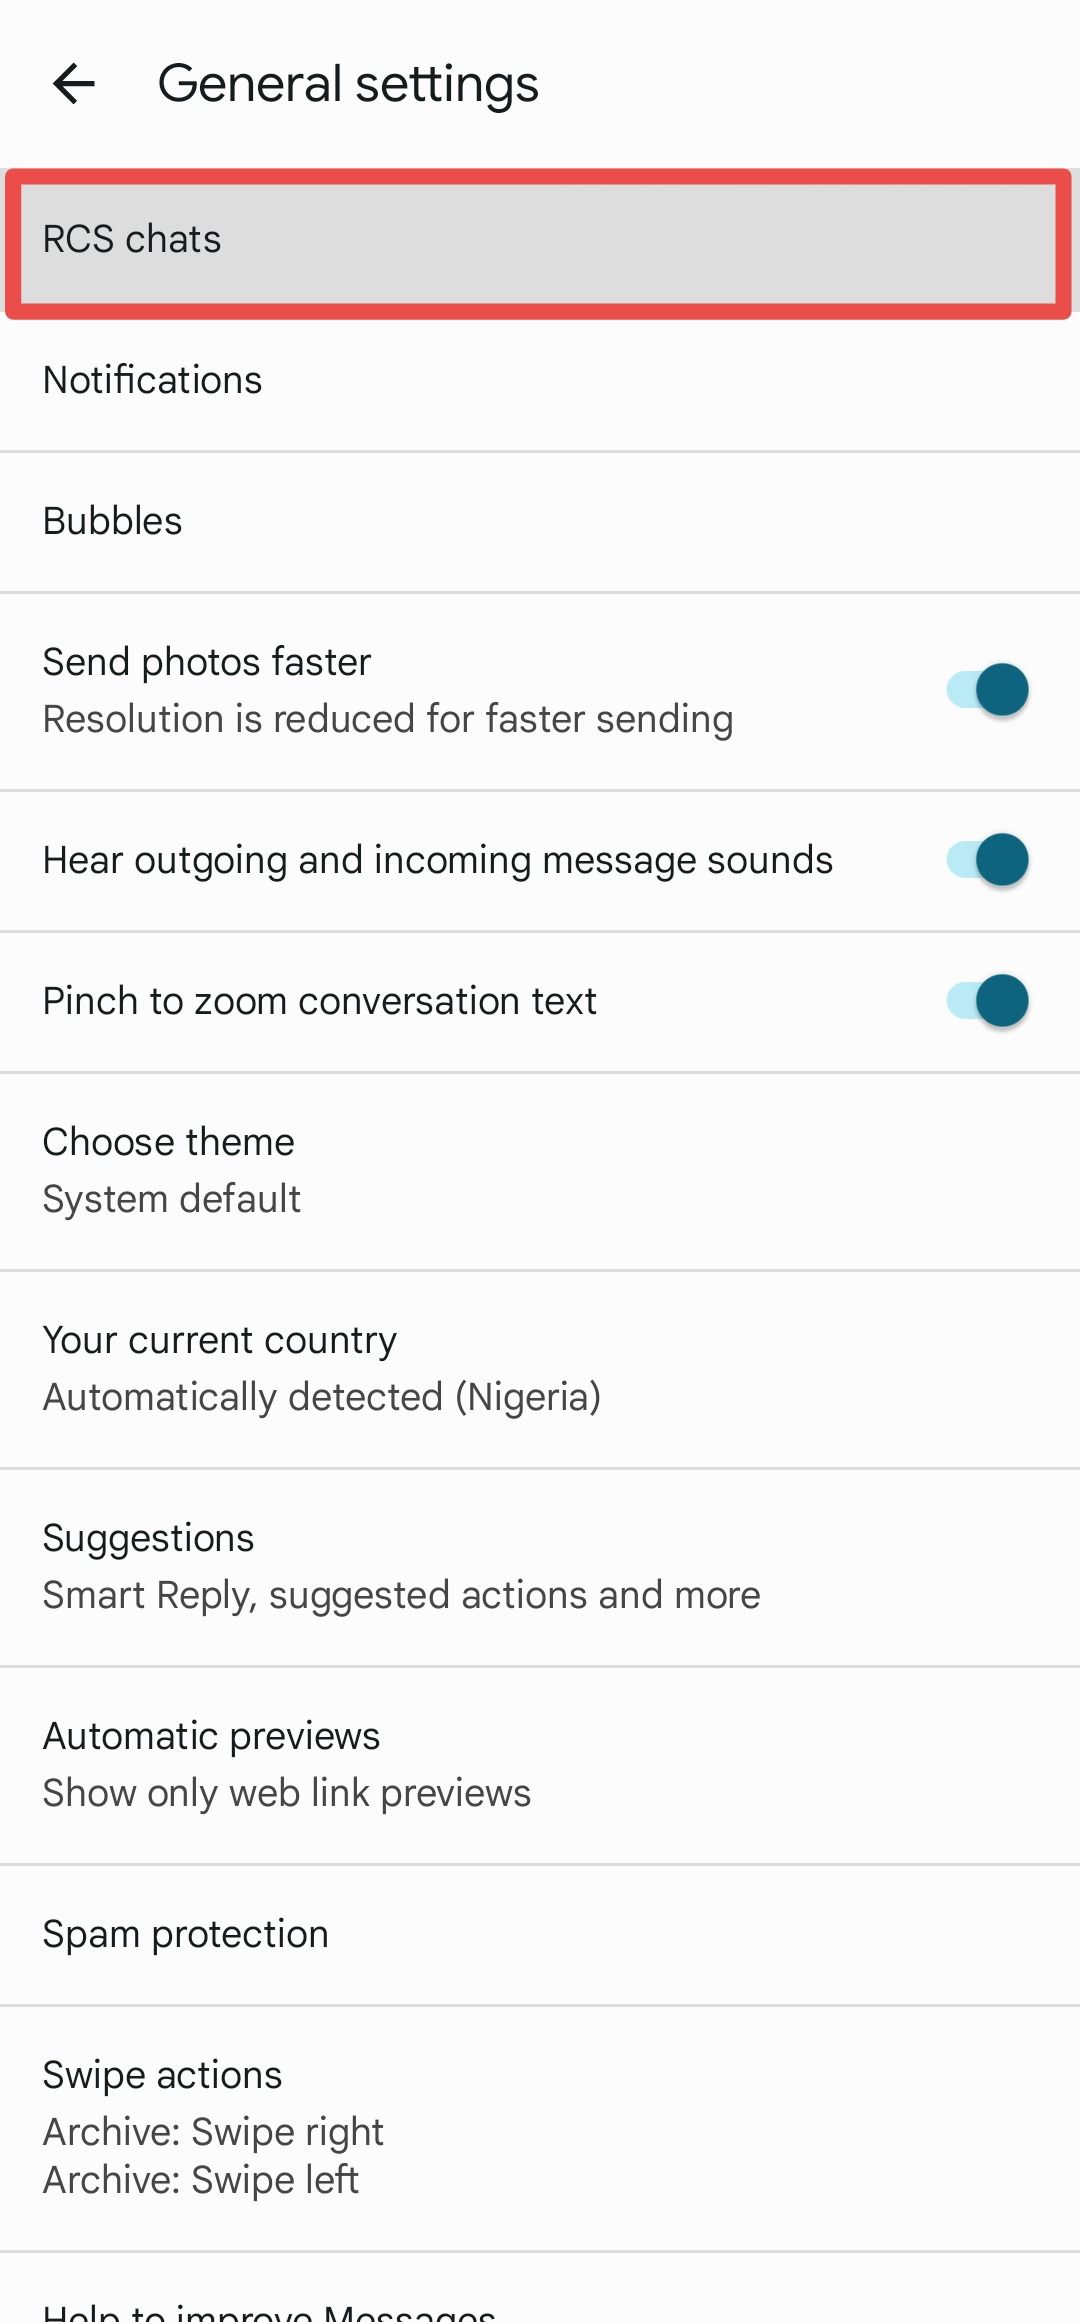 Google Messages general settings menu with RCS chats highlighted